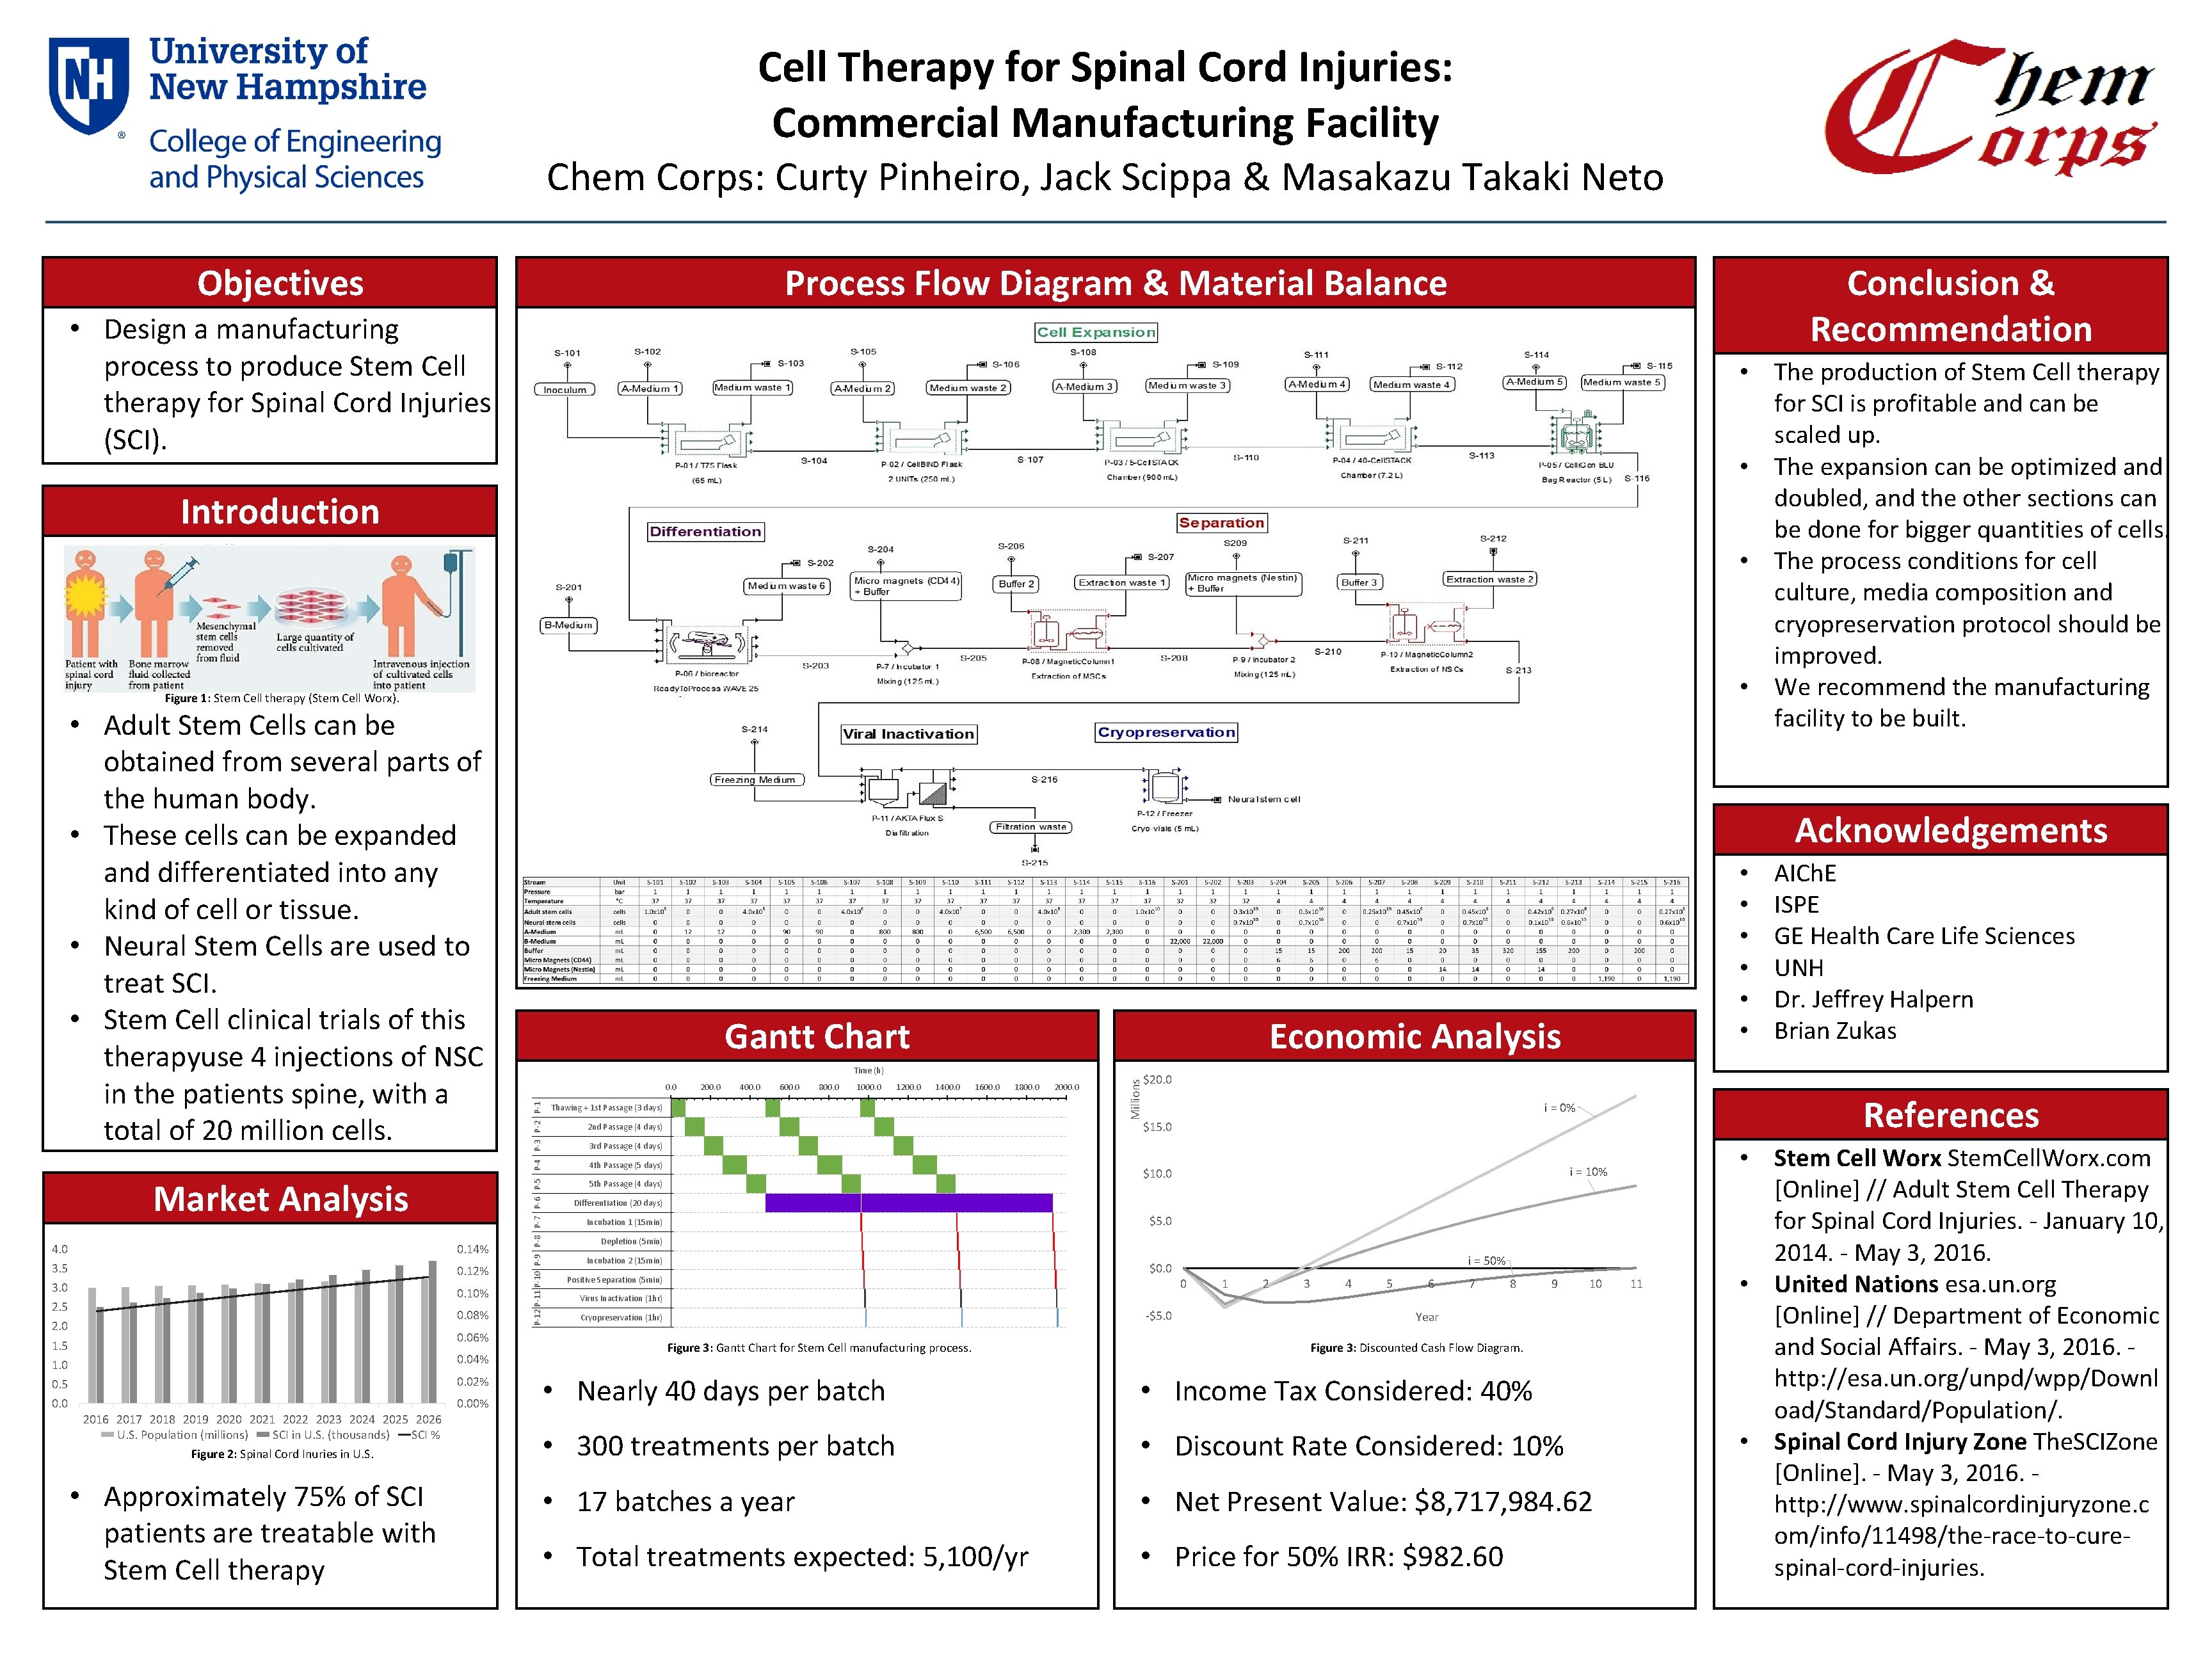 Cell Therapy for Spinal Cord Injuries: Commercial Manufacturing Facility Chem Corps: Curty Pinheiro, Jack